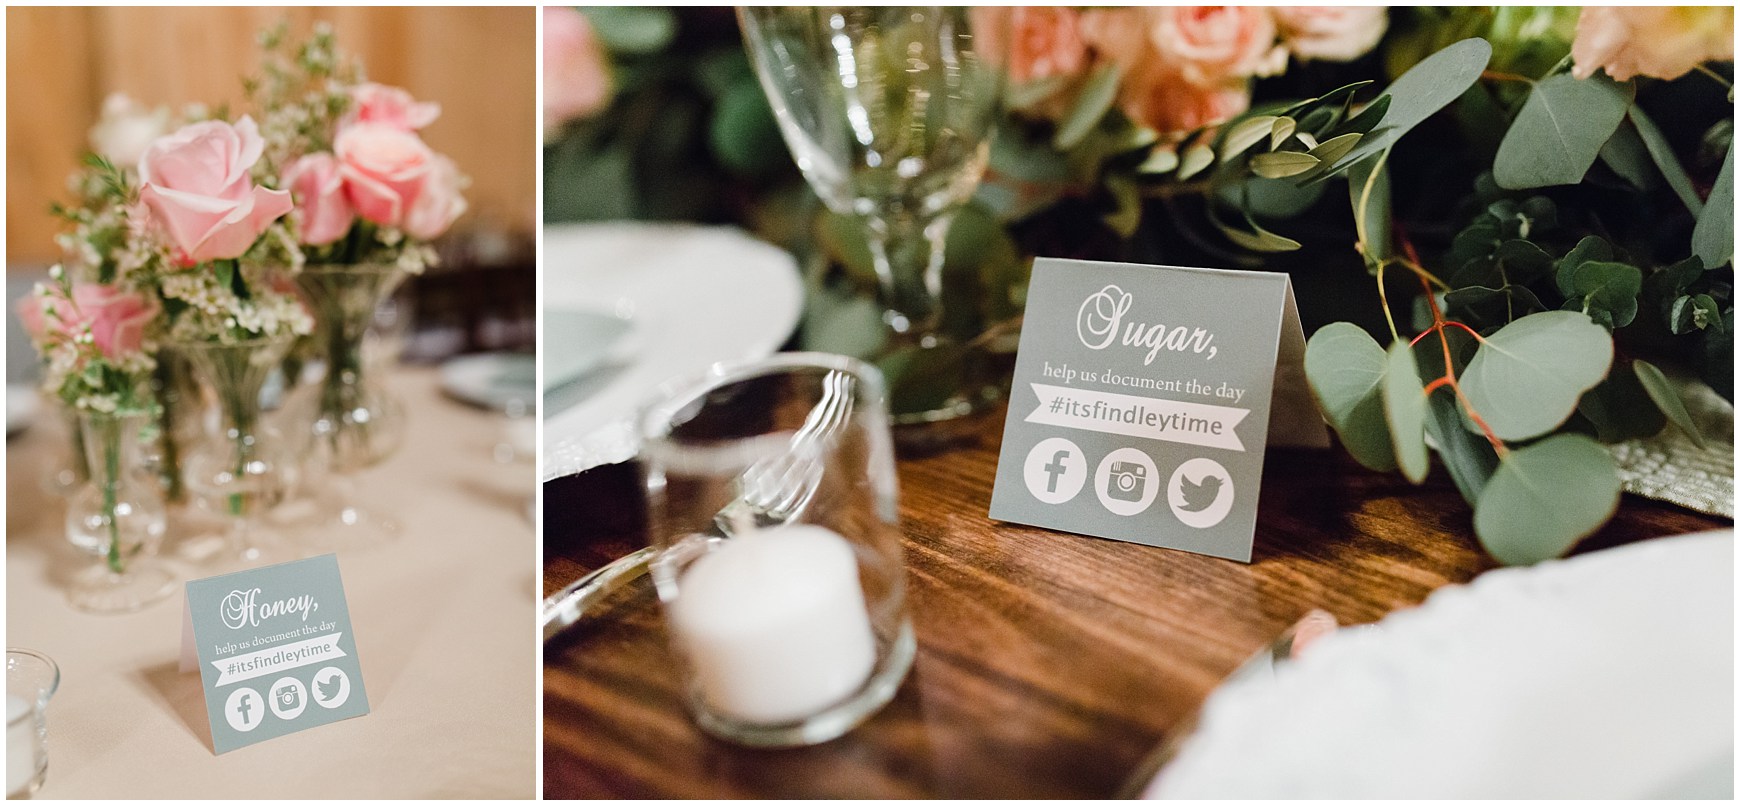 Wedding Details and hashtag